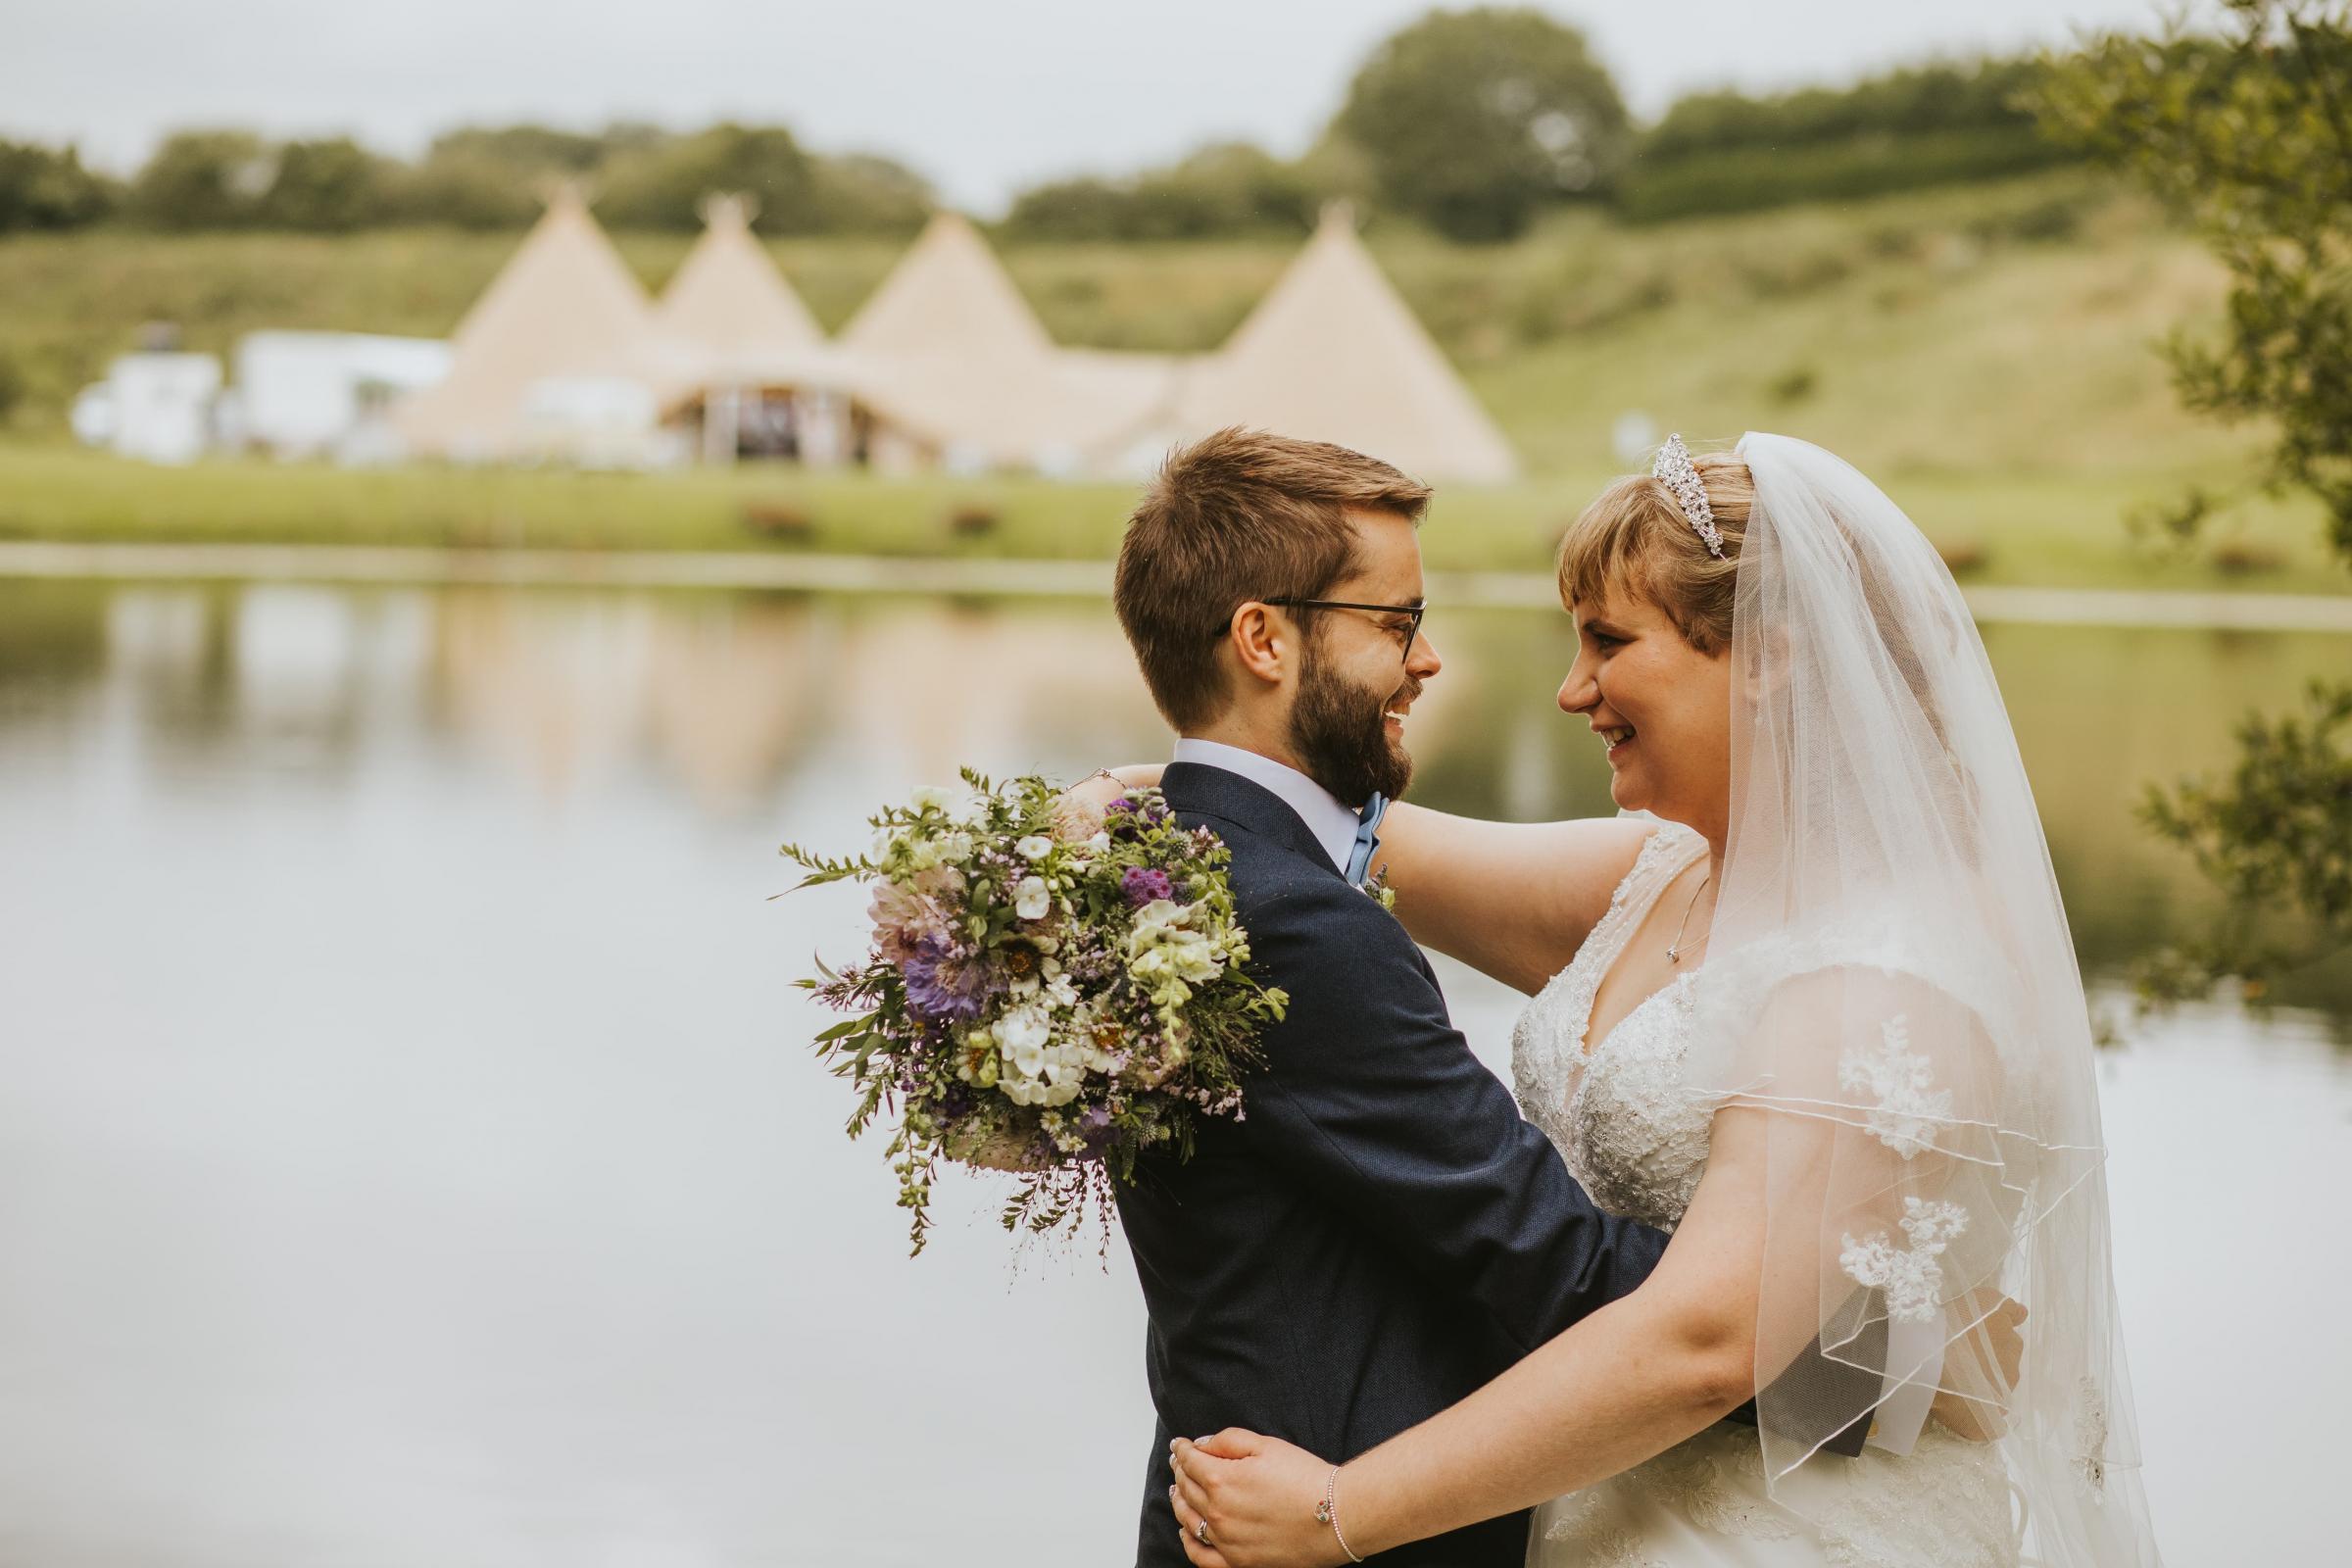 Delamere Events was the perfect place to say I do